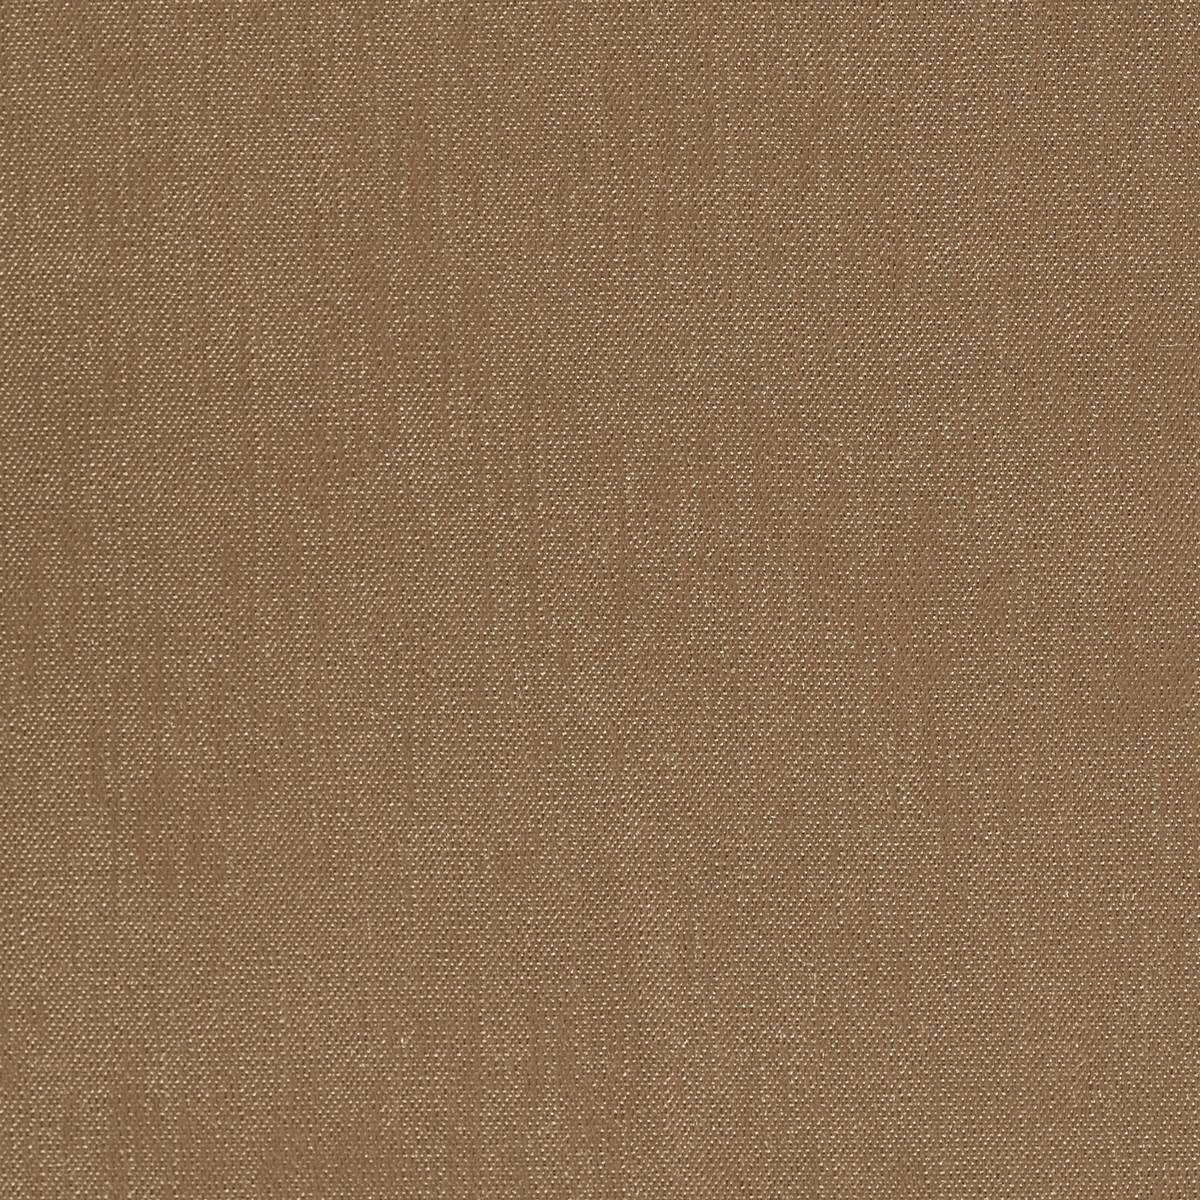 Spectro Mink Fabric by Harlequin